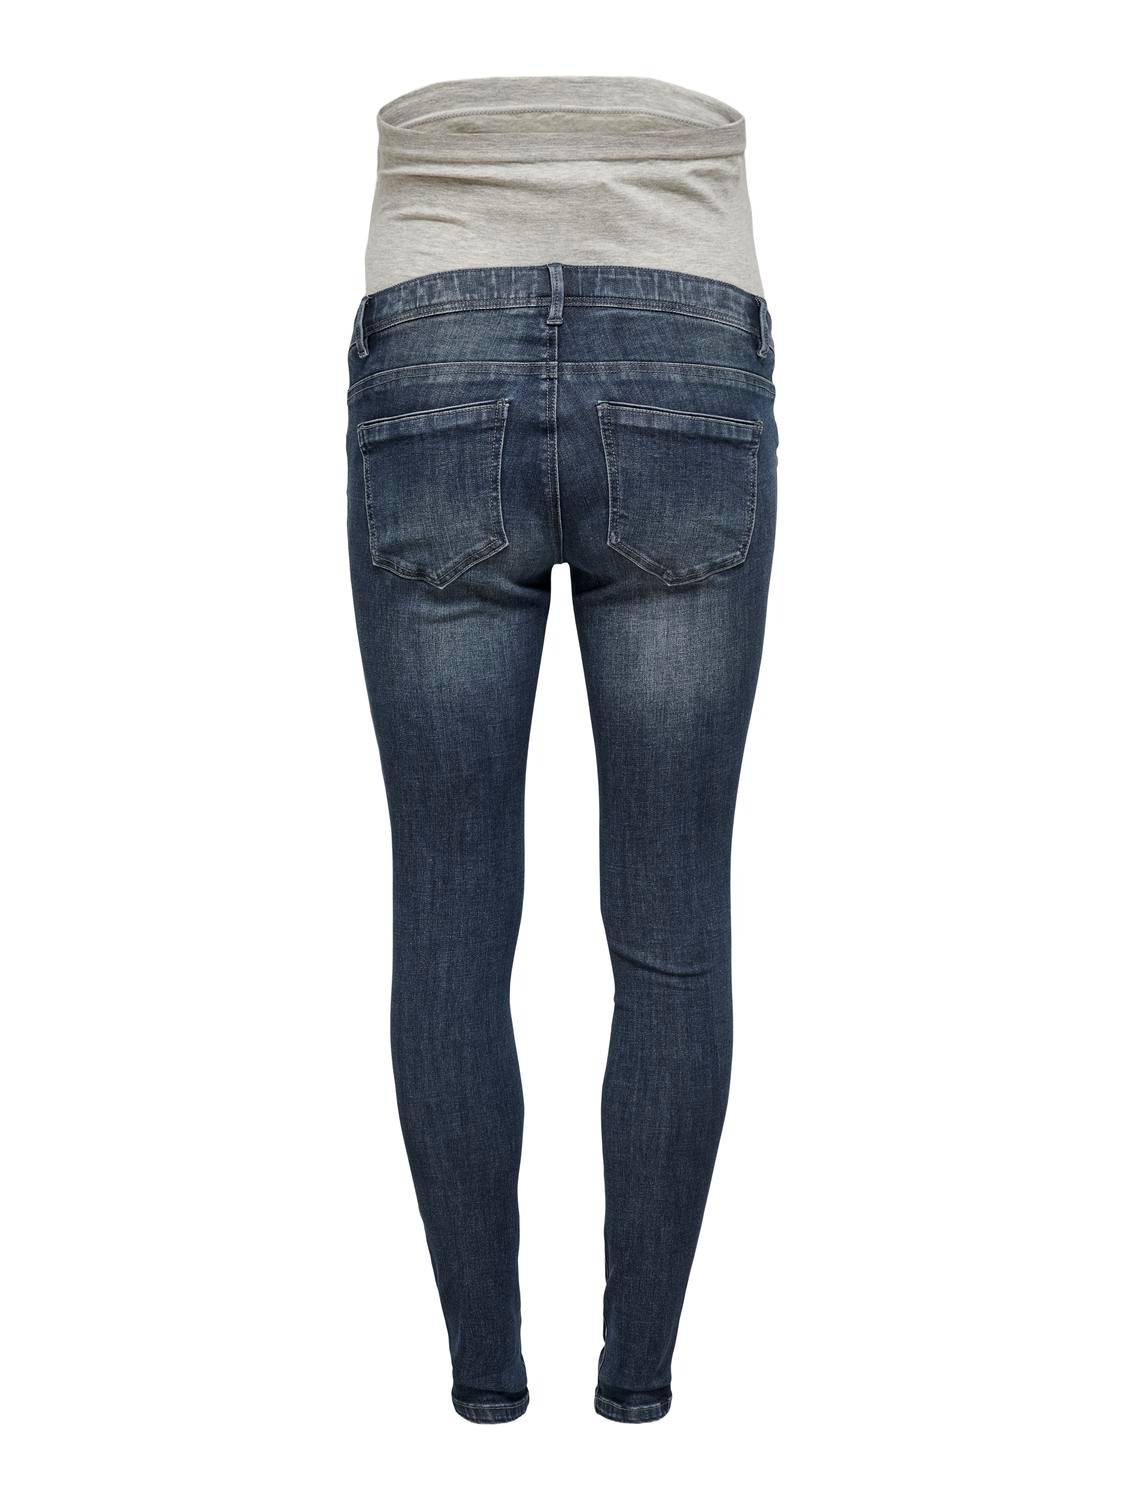 ONLY Jeans Skinny Fit Taille moyenne -Blue Black Denim - 15247845